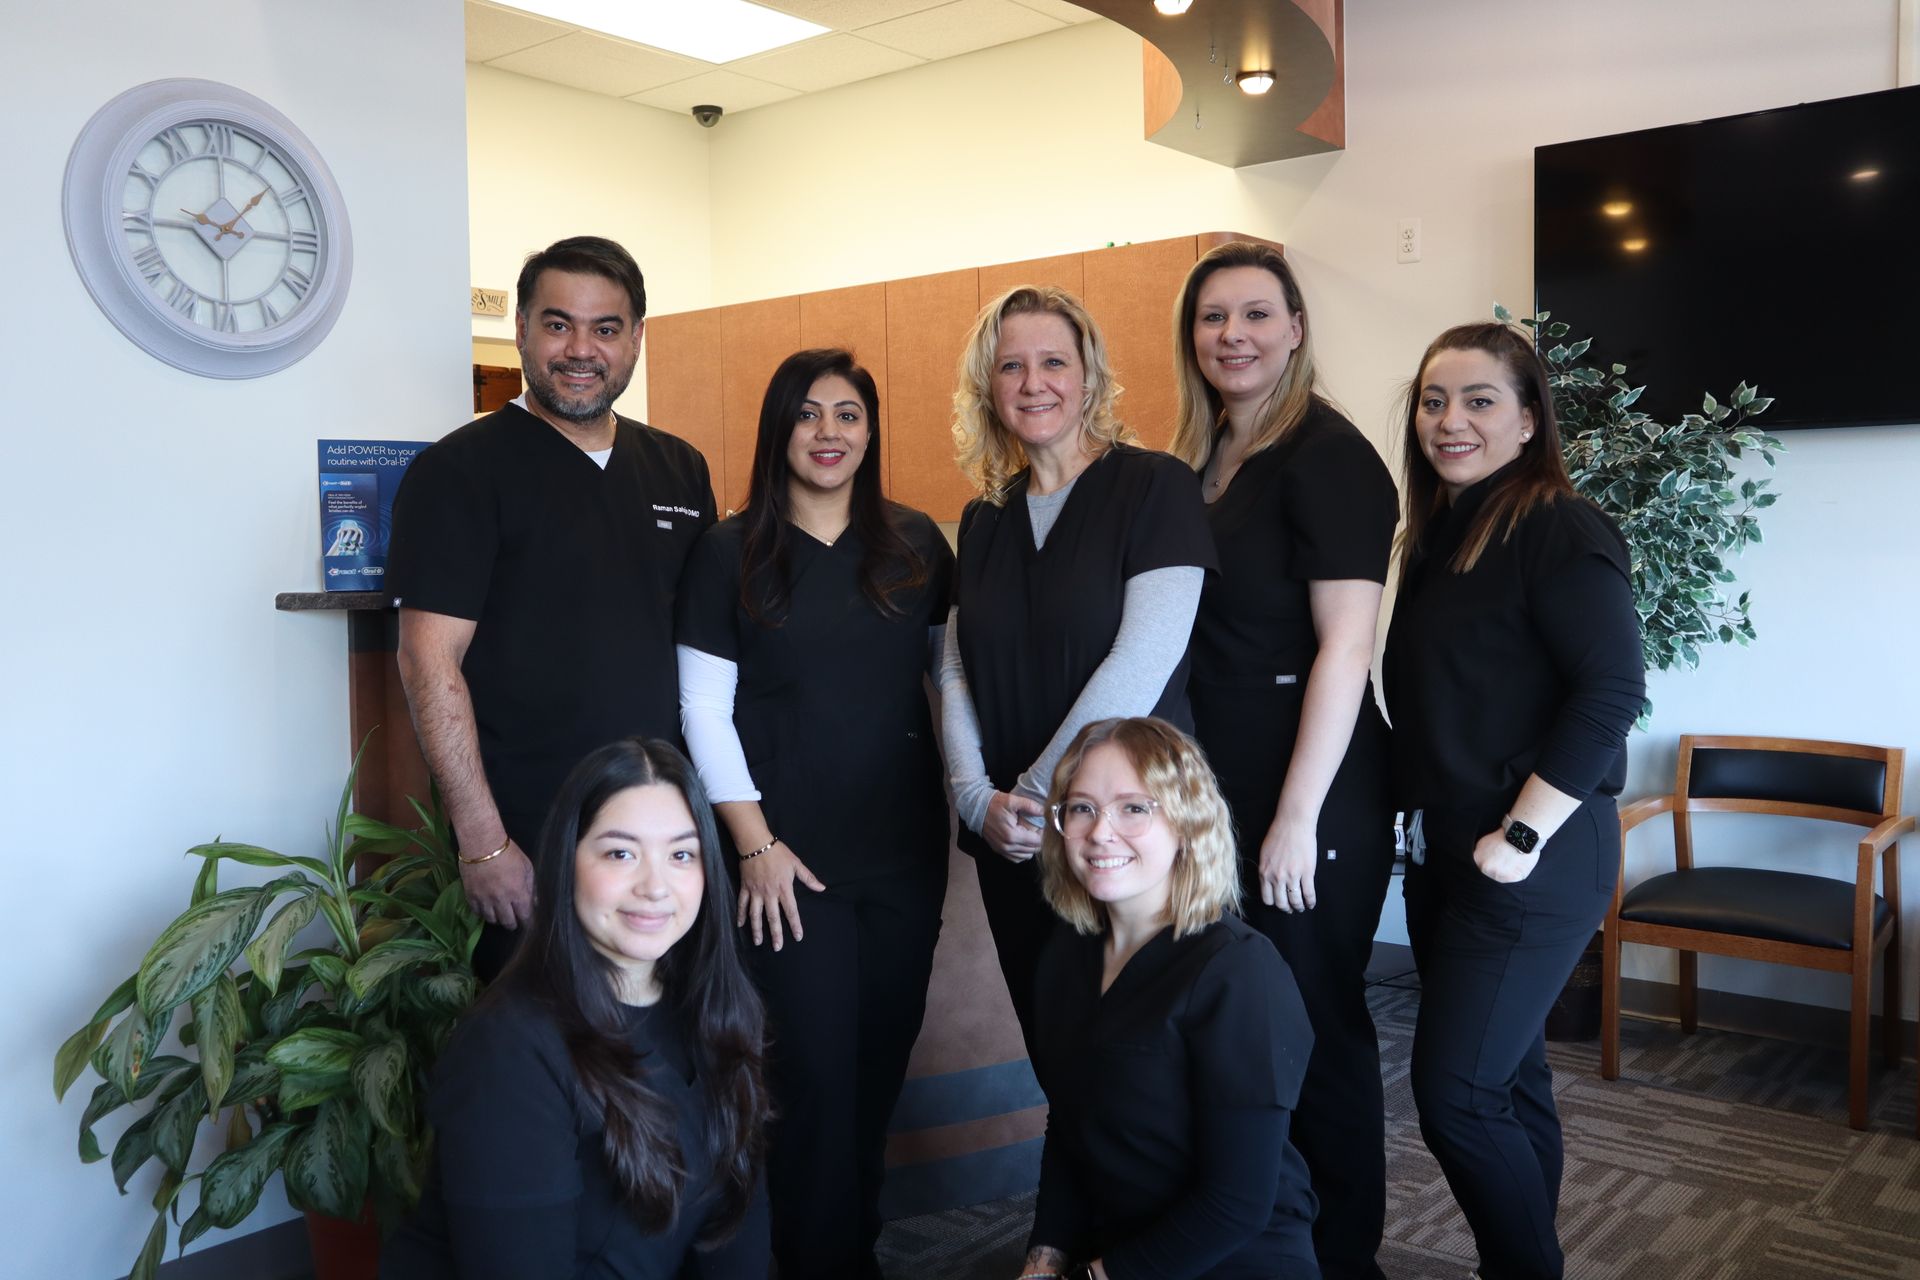 the dental team at Art Dentistry Center standing in the lobby of the practice.